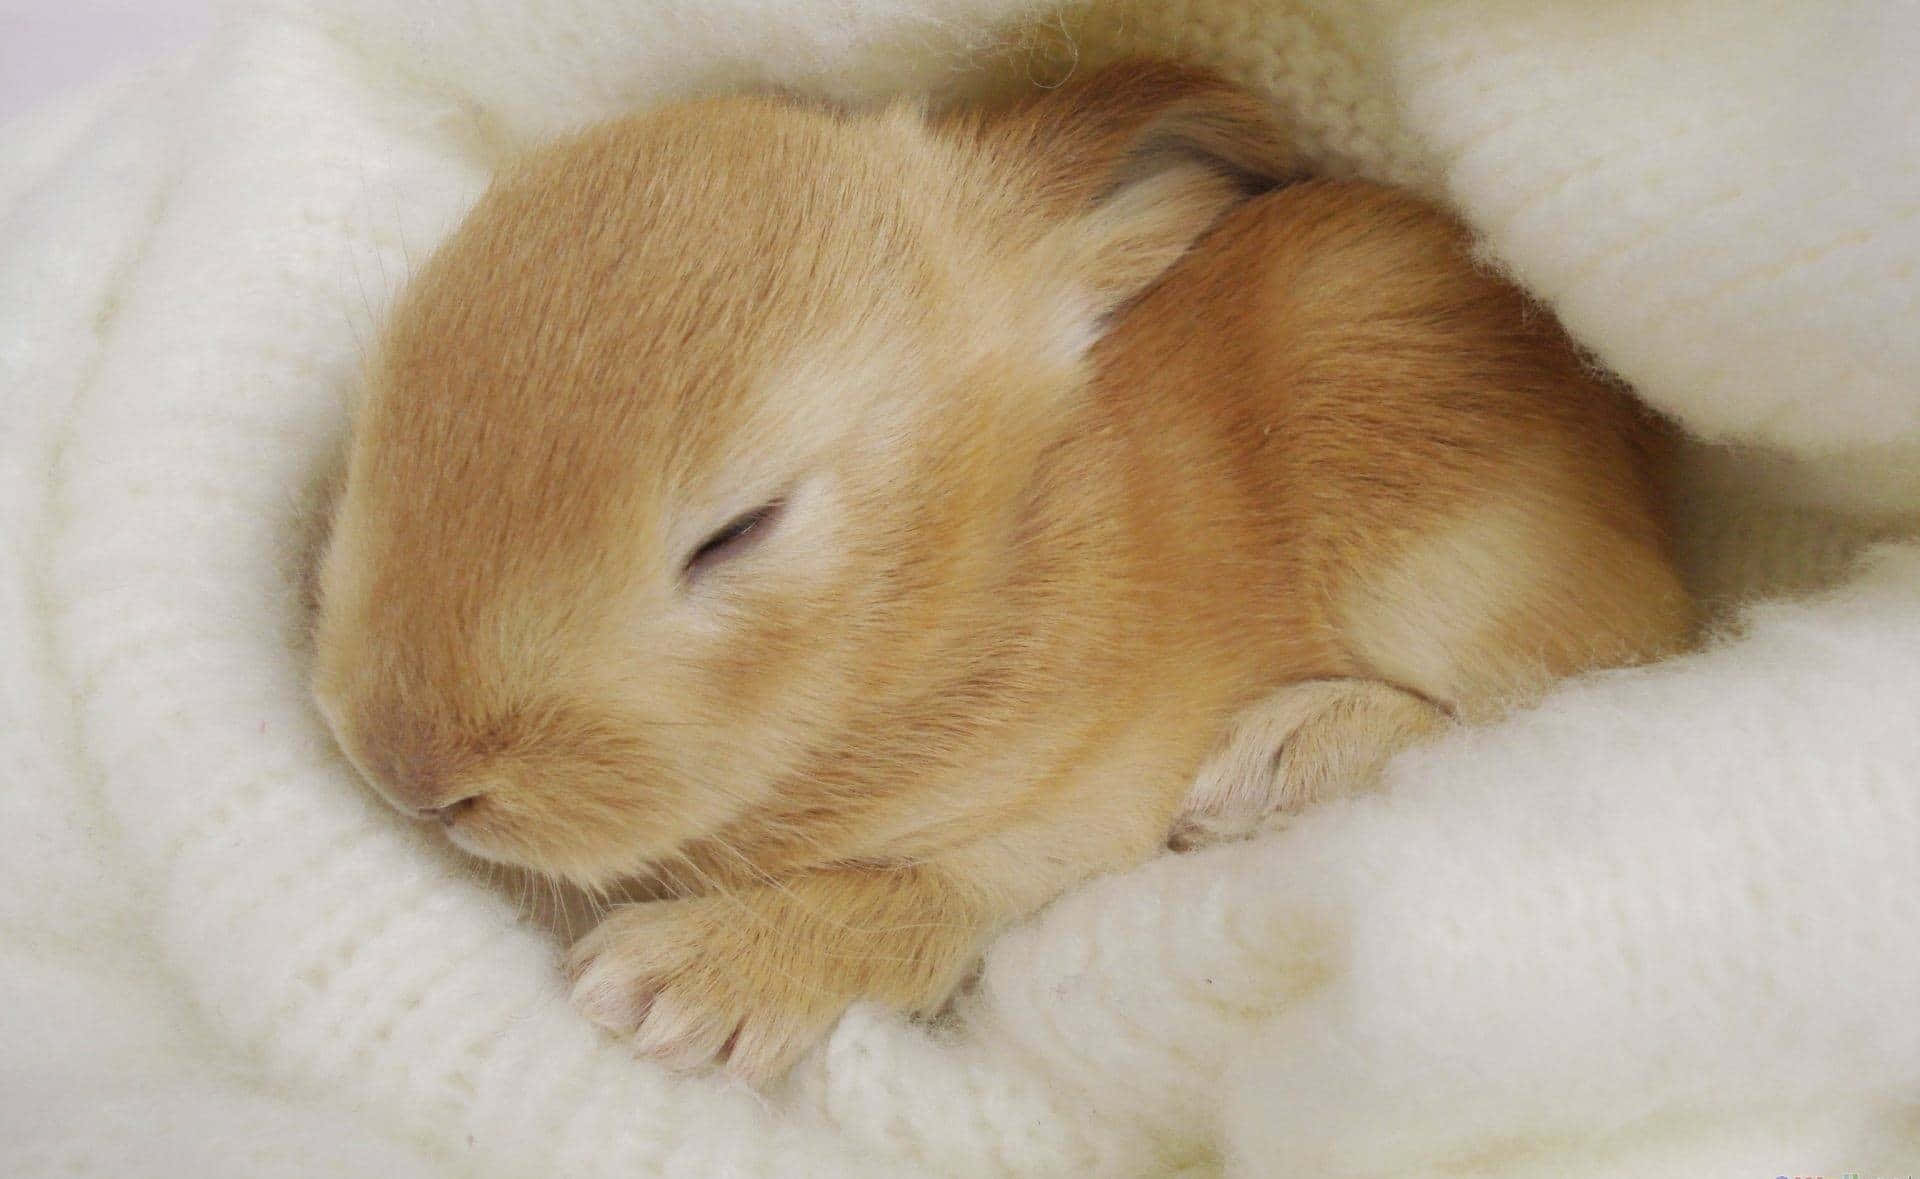 Cuddle with a beautiful bunny